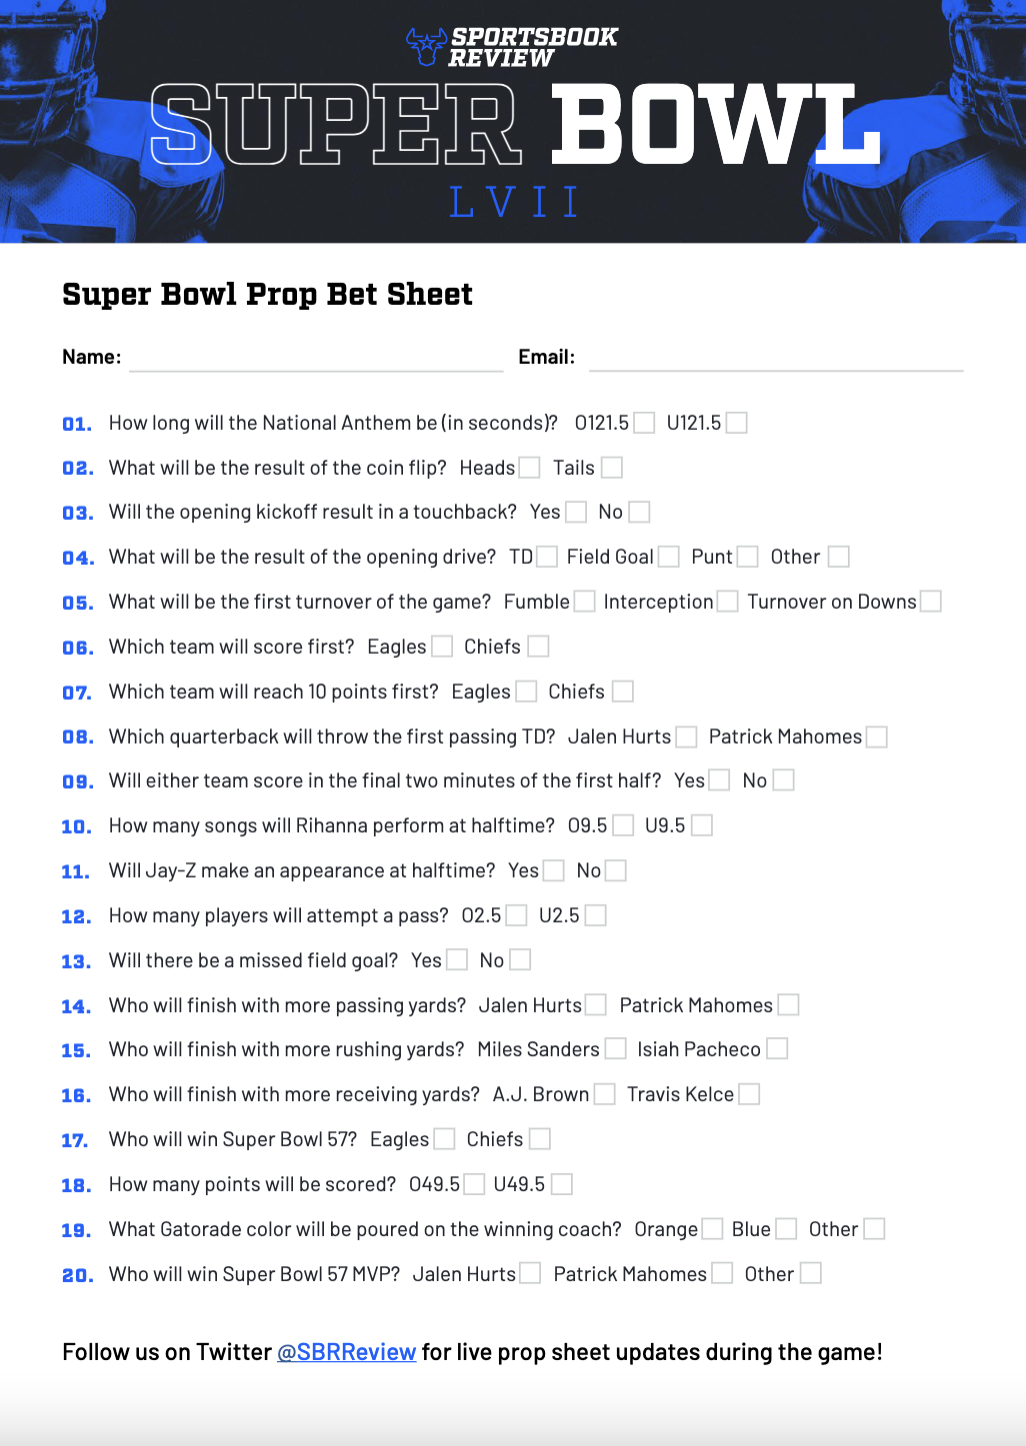 Super Bowl 57 Game Props – Odds on Winning Margin, First Scoring Play,  Total TDs and More